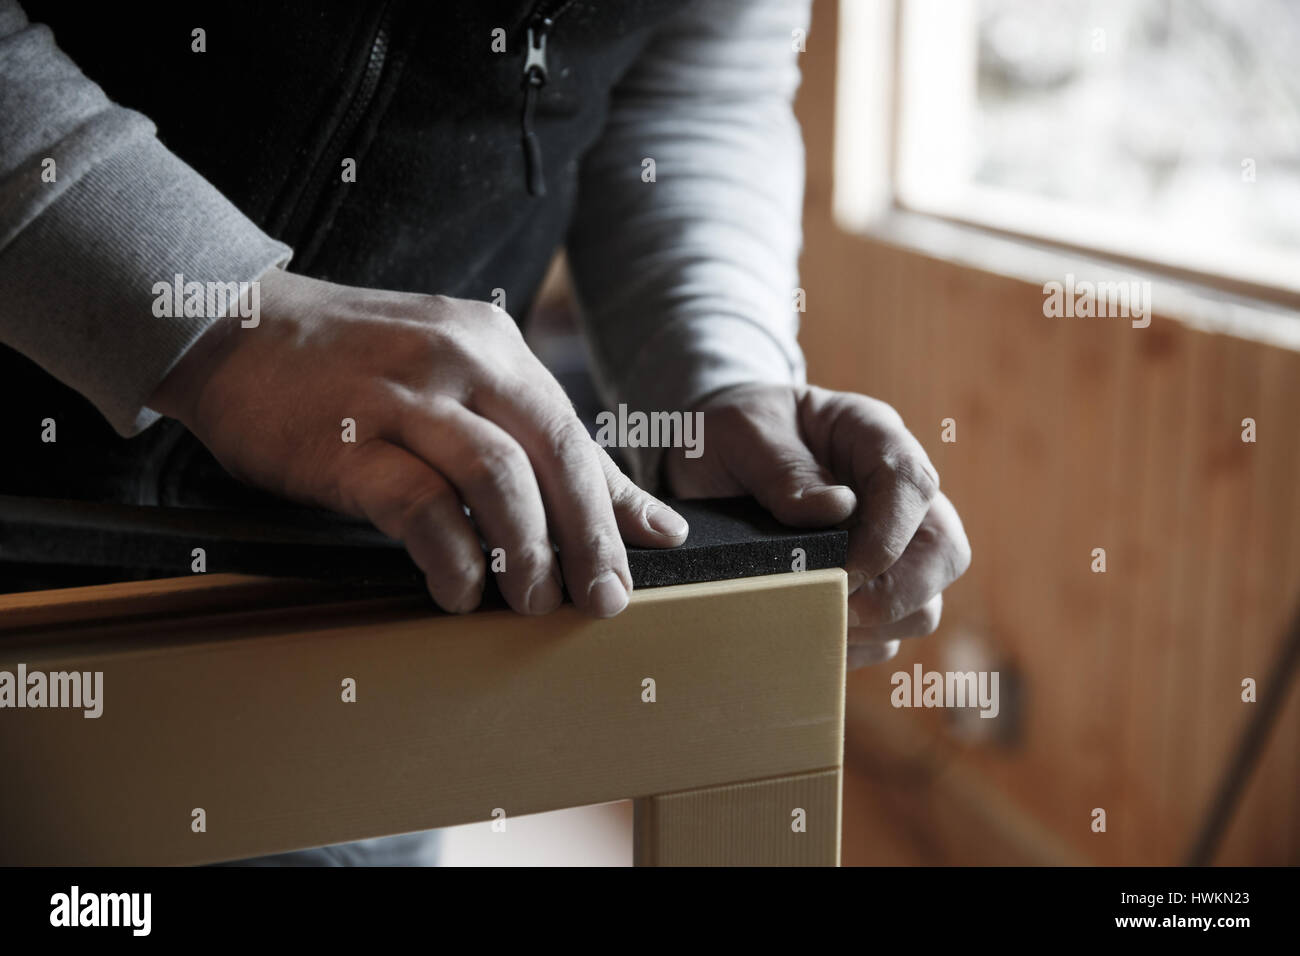 Worker preparing to install new three pane wooden windows in an old wooden house. Home renovation, sustainable living, energy efficiency concept. Stock Photo